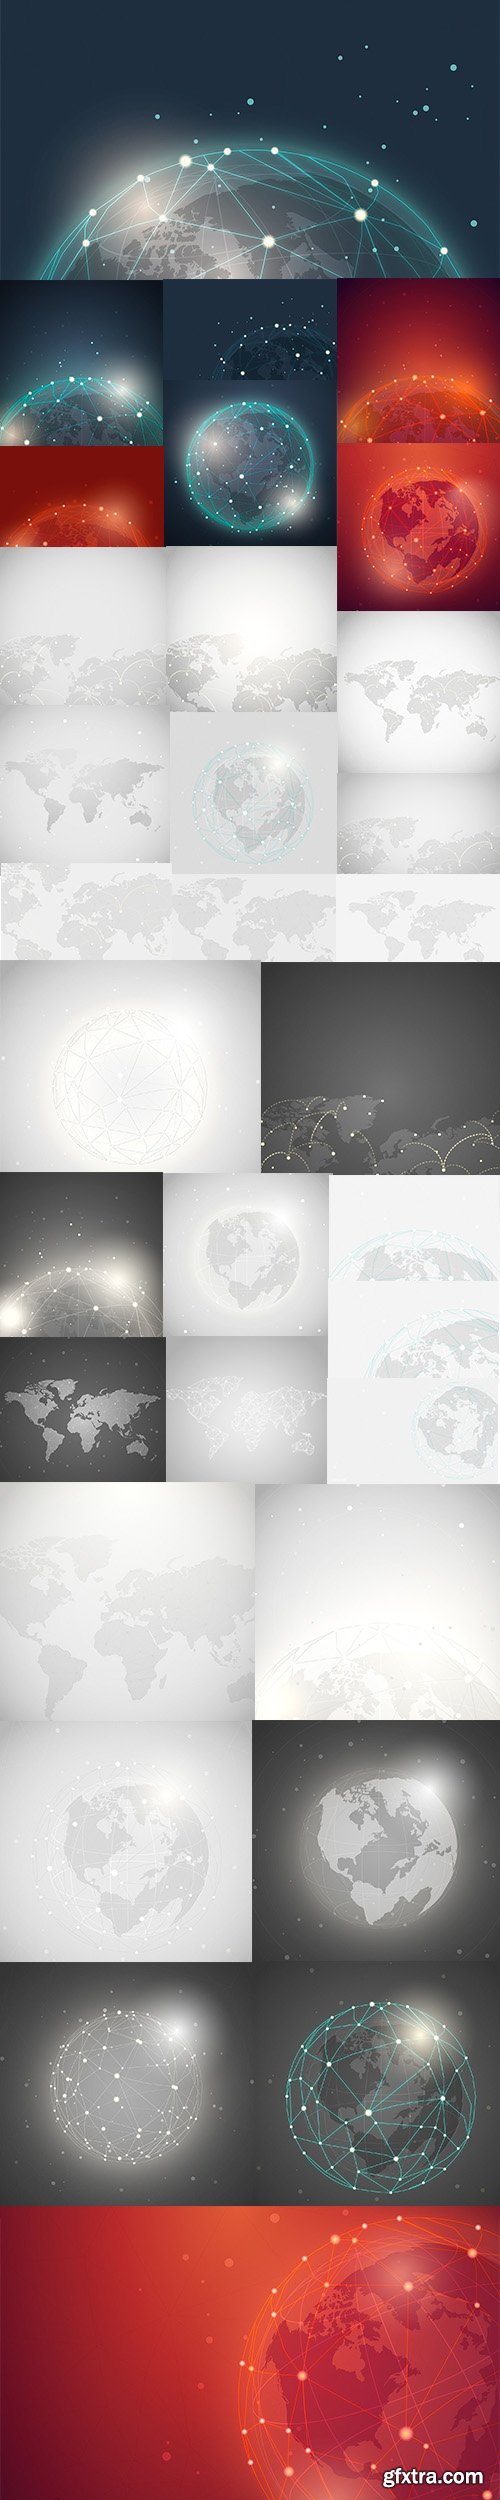 Vector Set - Worldwide Connection Illustration Collection